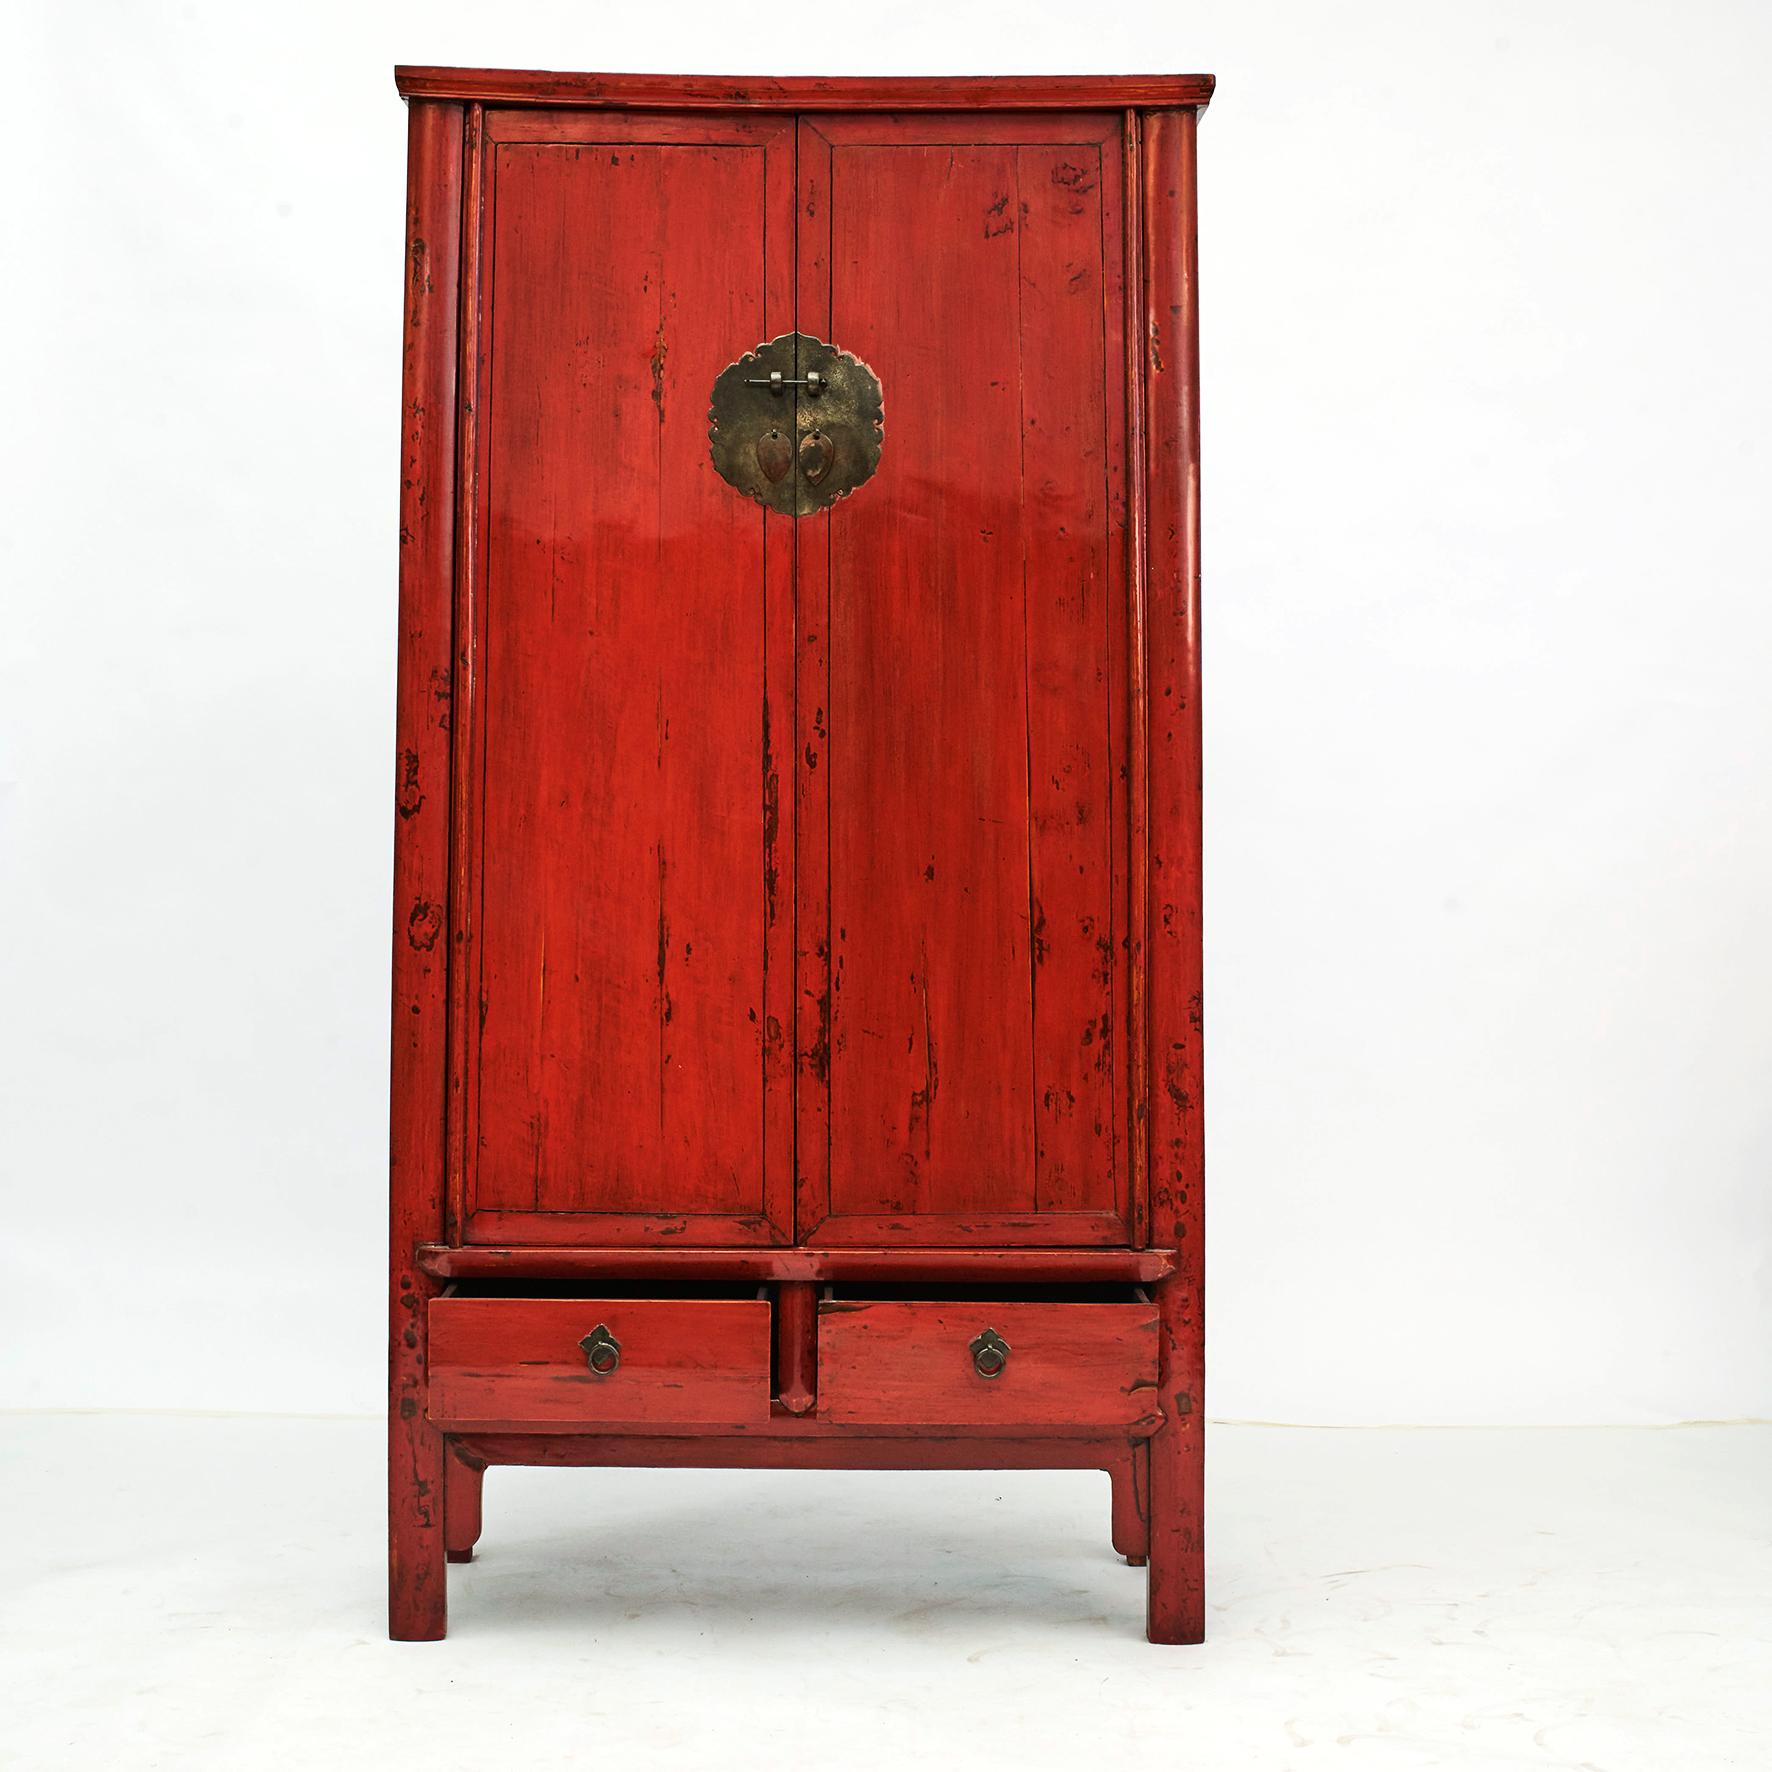 Mid-19th century Chinese wardrobe. Red lacquer with a beautiful age-related patina.
This slightly tapered cabinet features two bottom drawers with ring pull handles.
The doors open via a traditional Chinese lockset sitting on a central medallion.